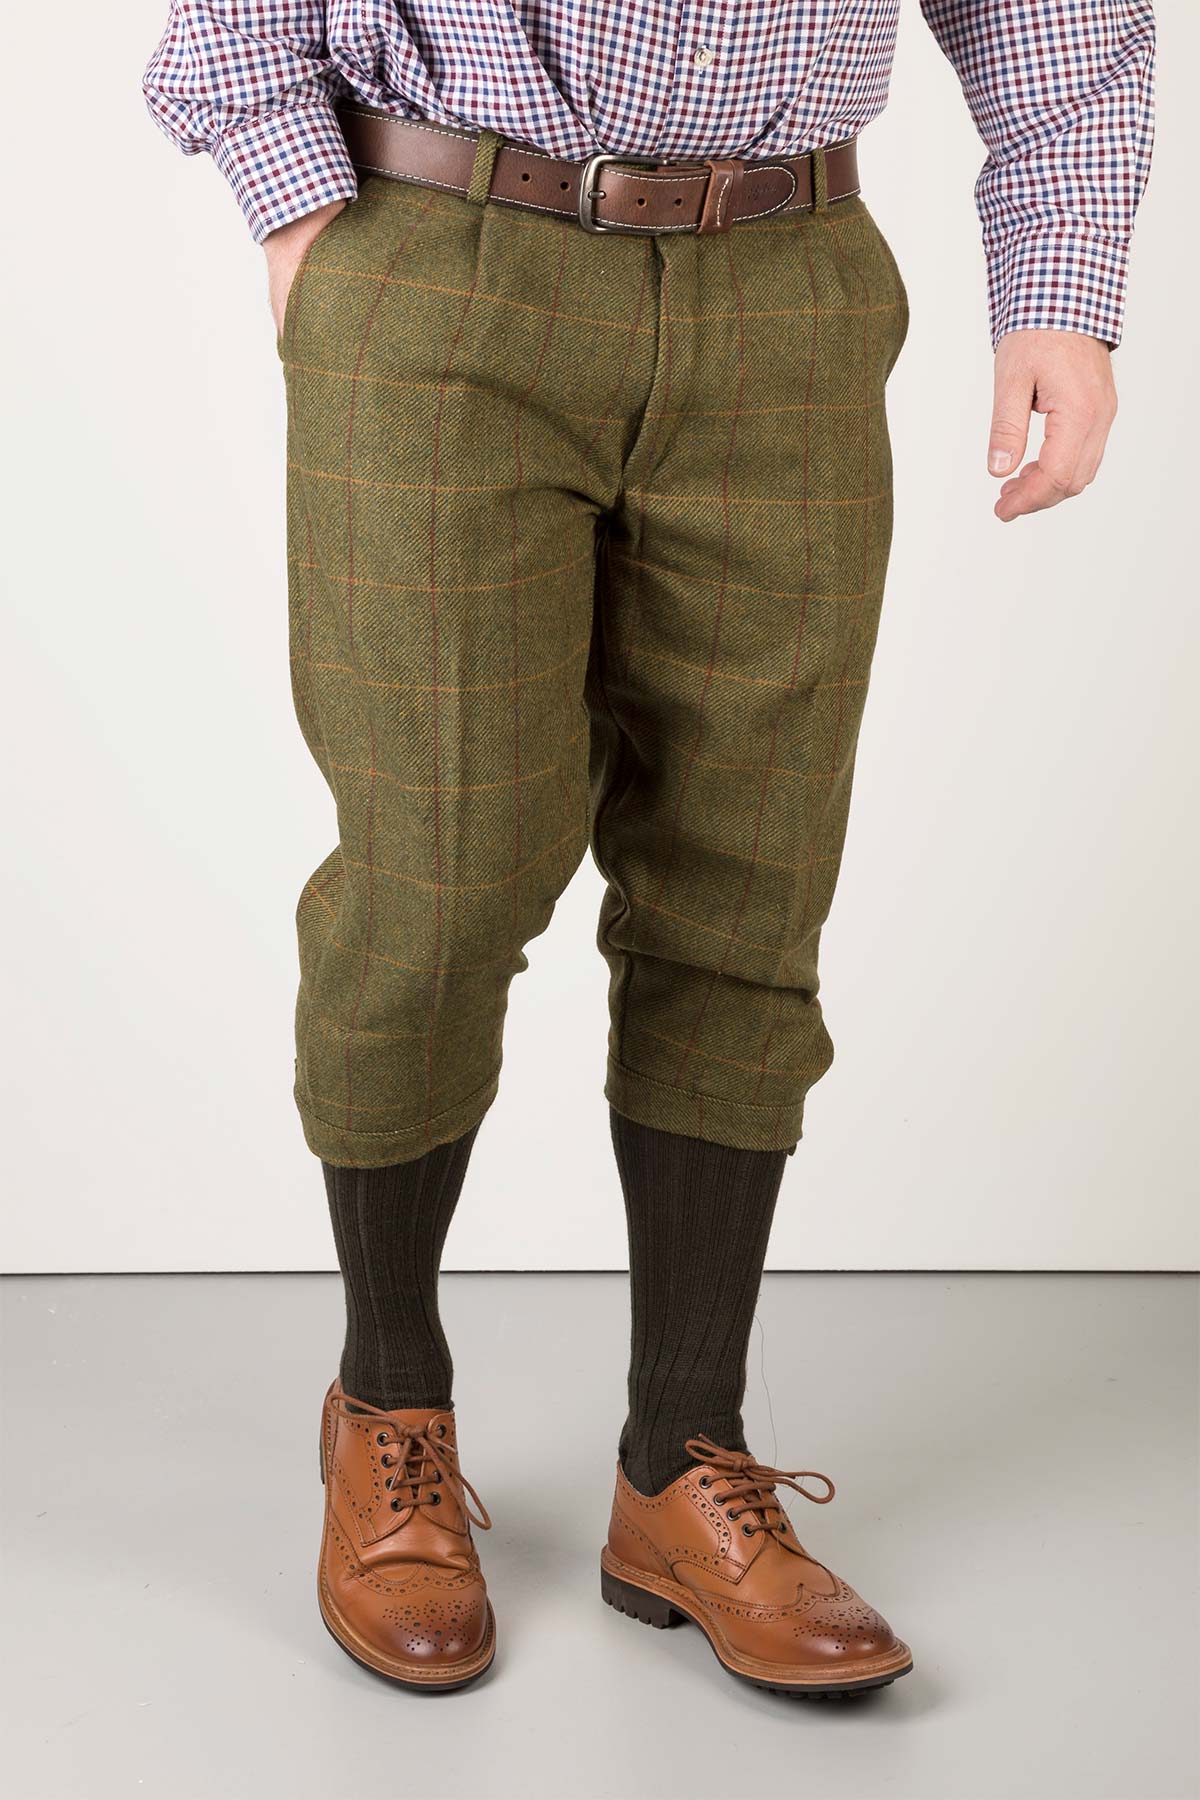 Best hunting trousers that are waterproof and breathable  tried and tested